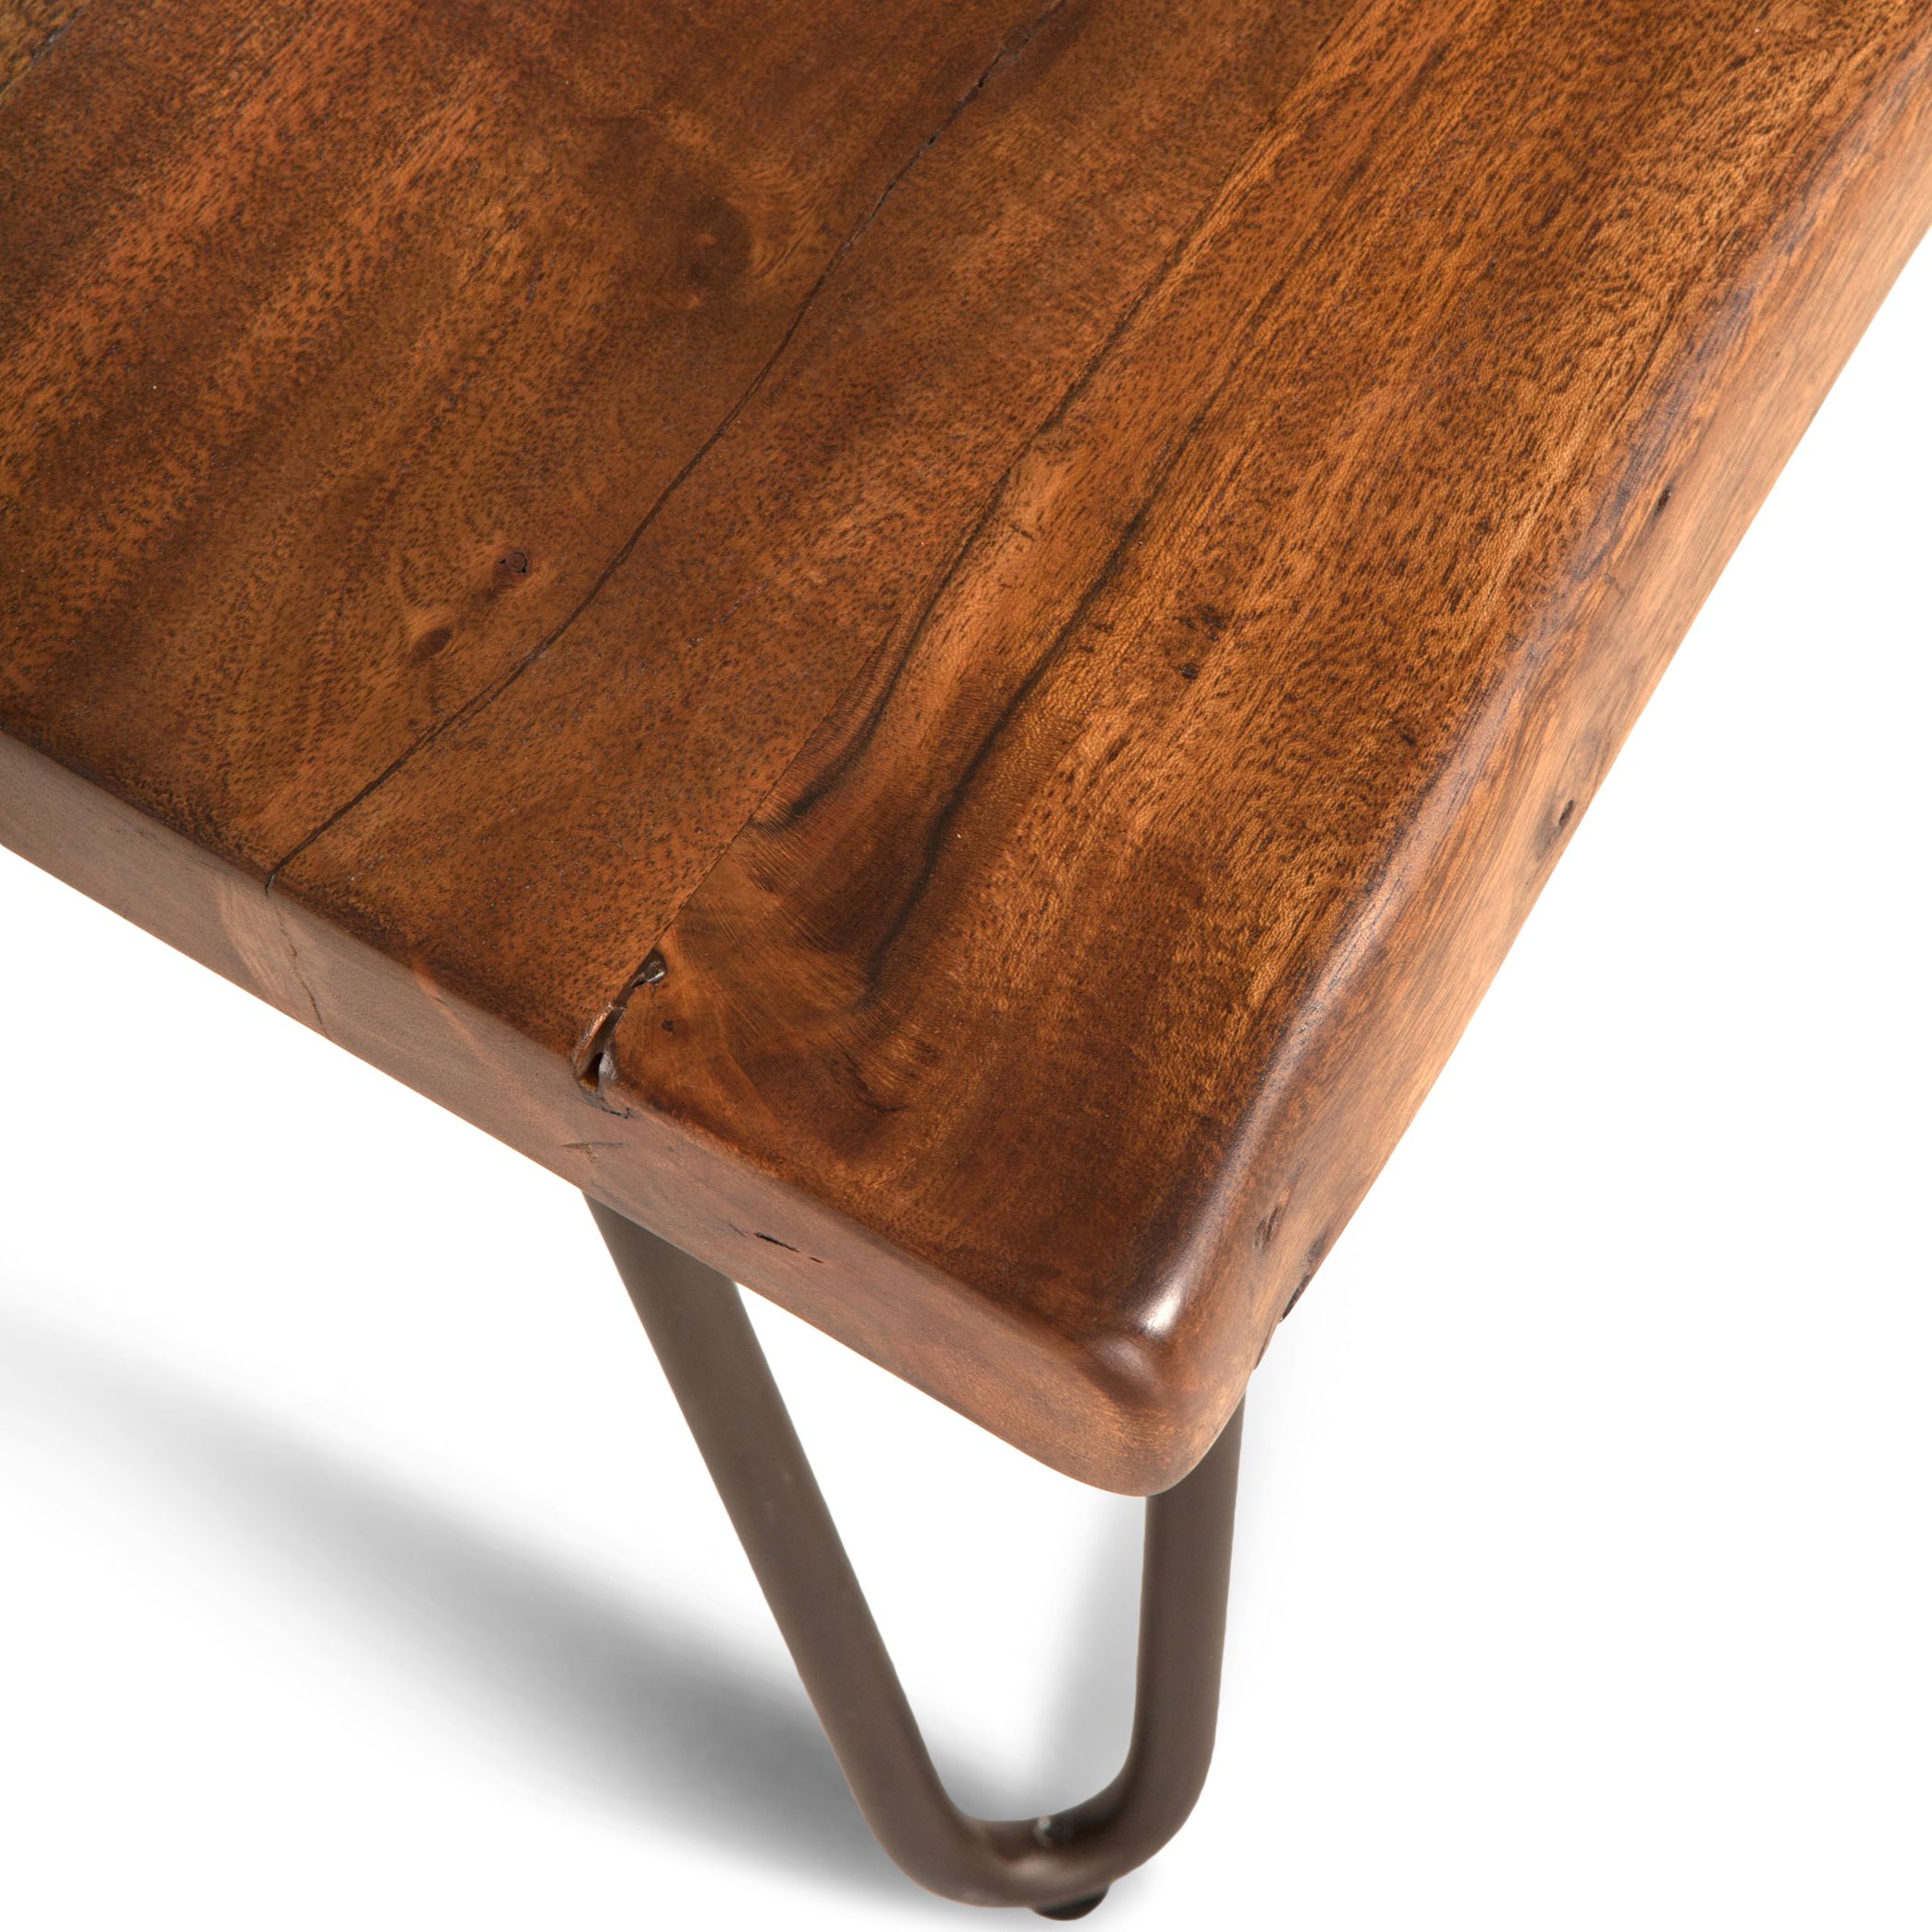 Walnut Coffee Tables Throughout Widely Used Vail Acacia Wood Live Edge Coffee Table In Walnut Finish (View 17 of 20)